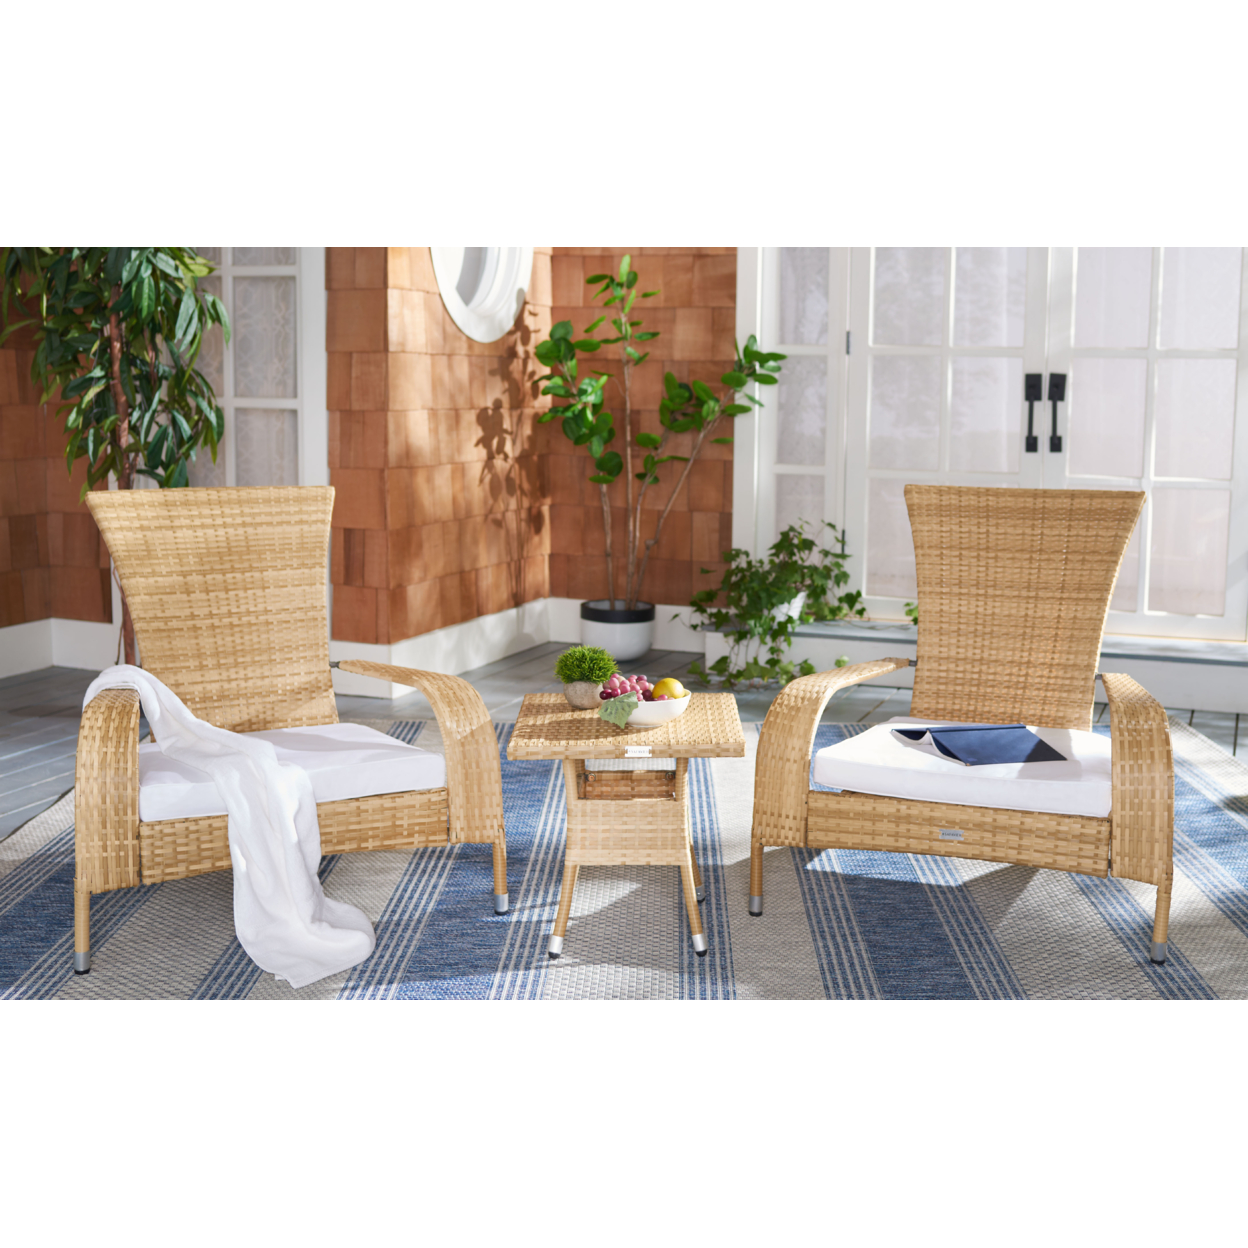 SAFAVIEH Outdoor Collection Edna 3-Piece Lounge Set Natural/White Cushion